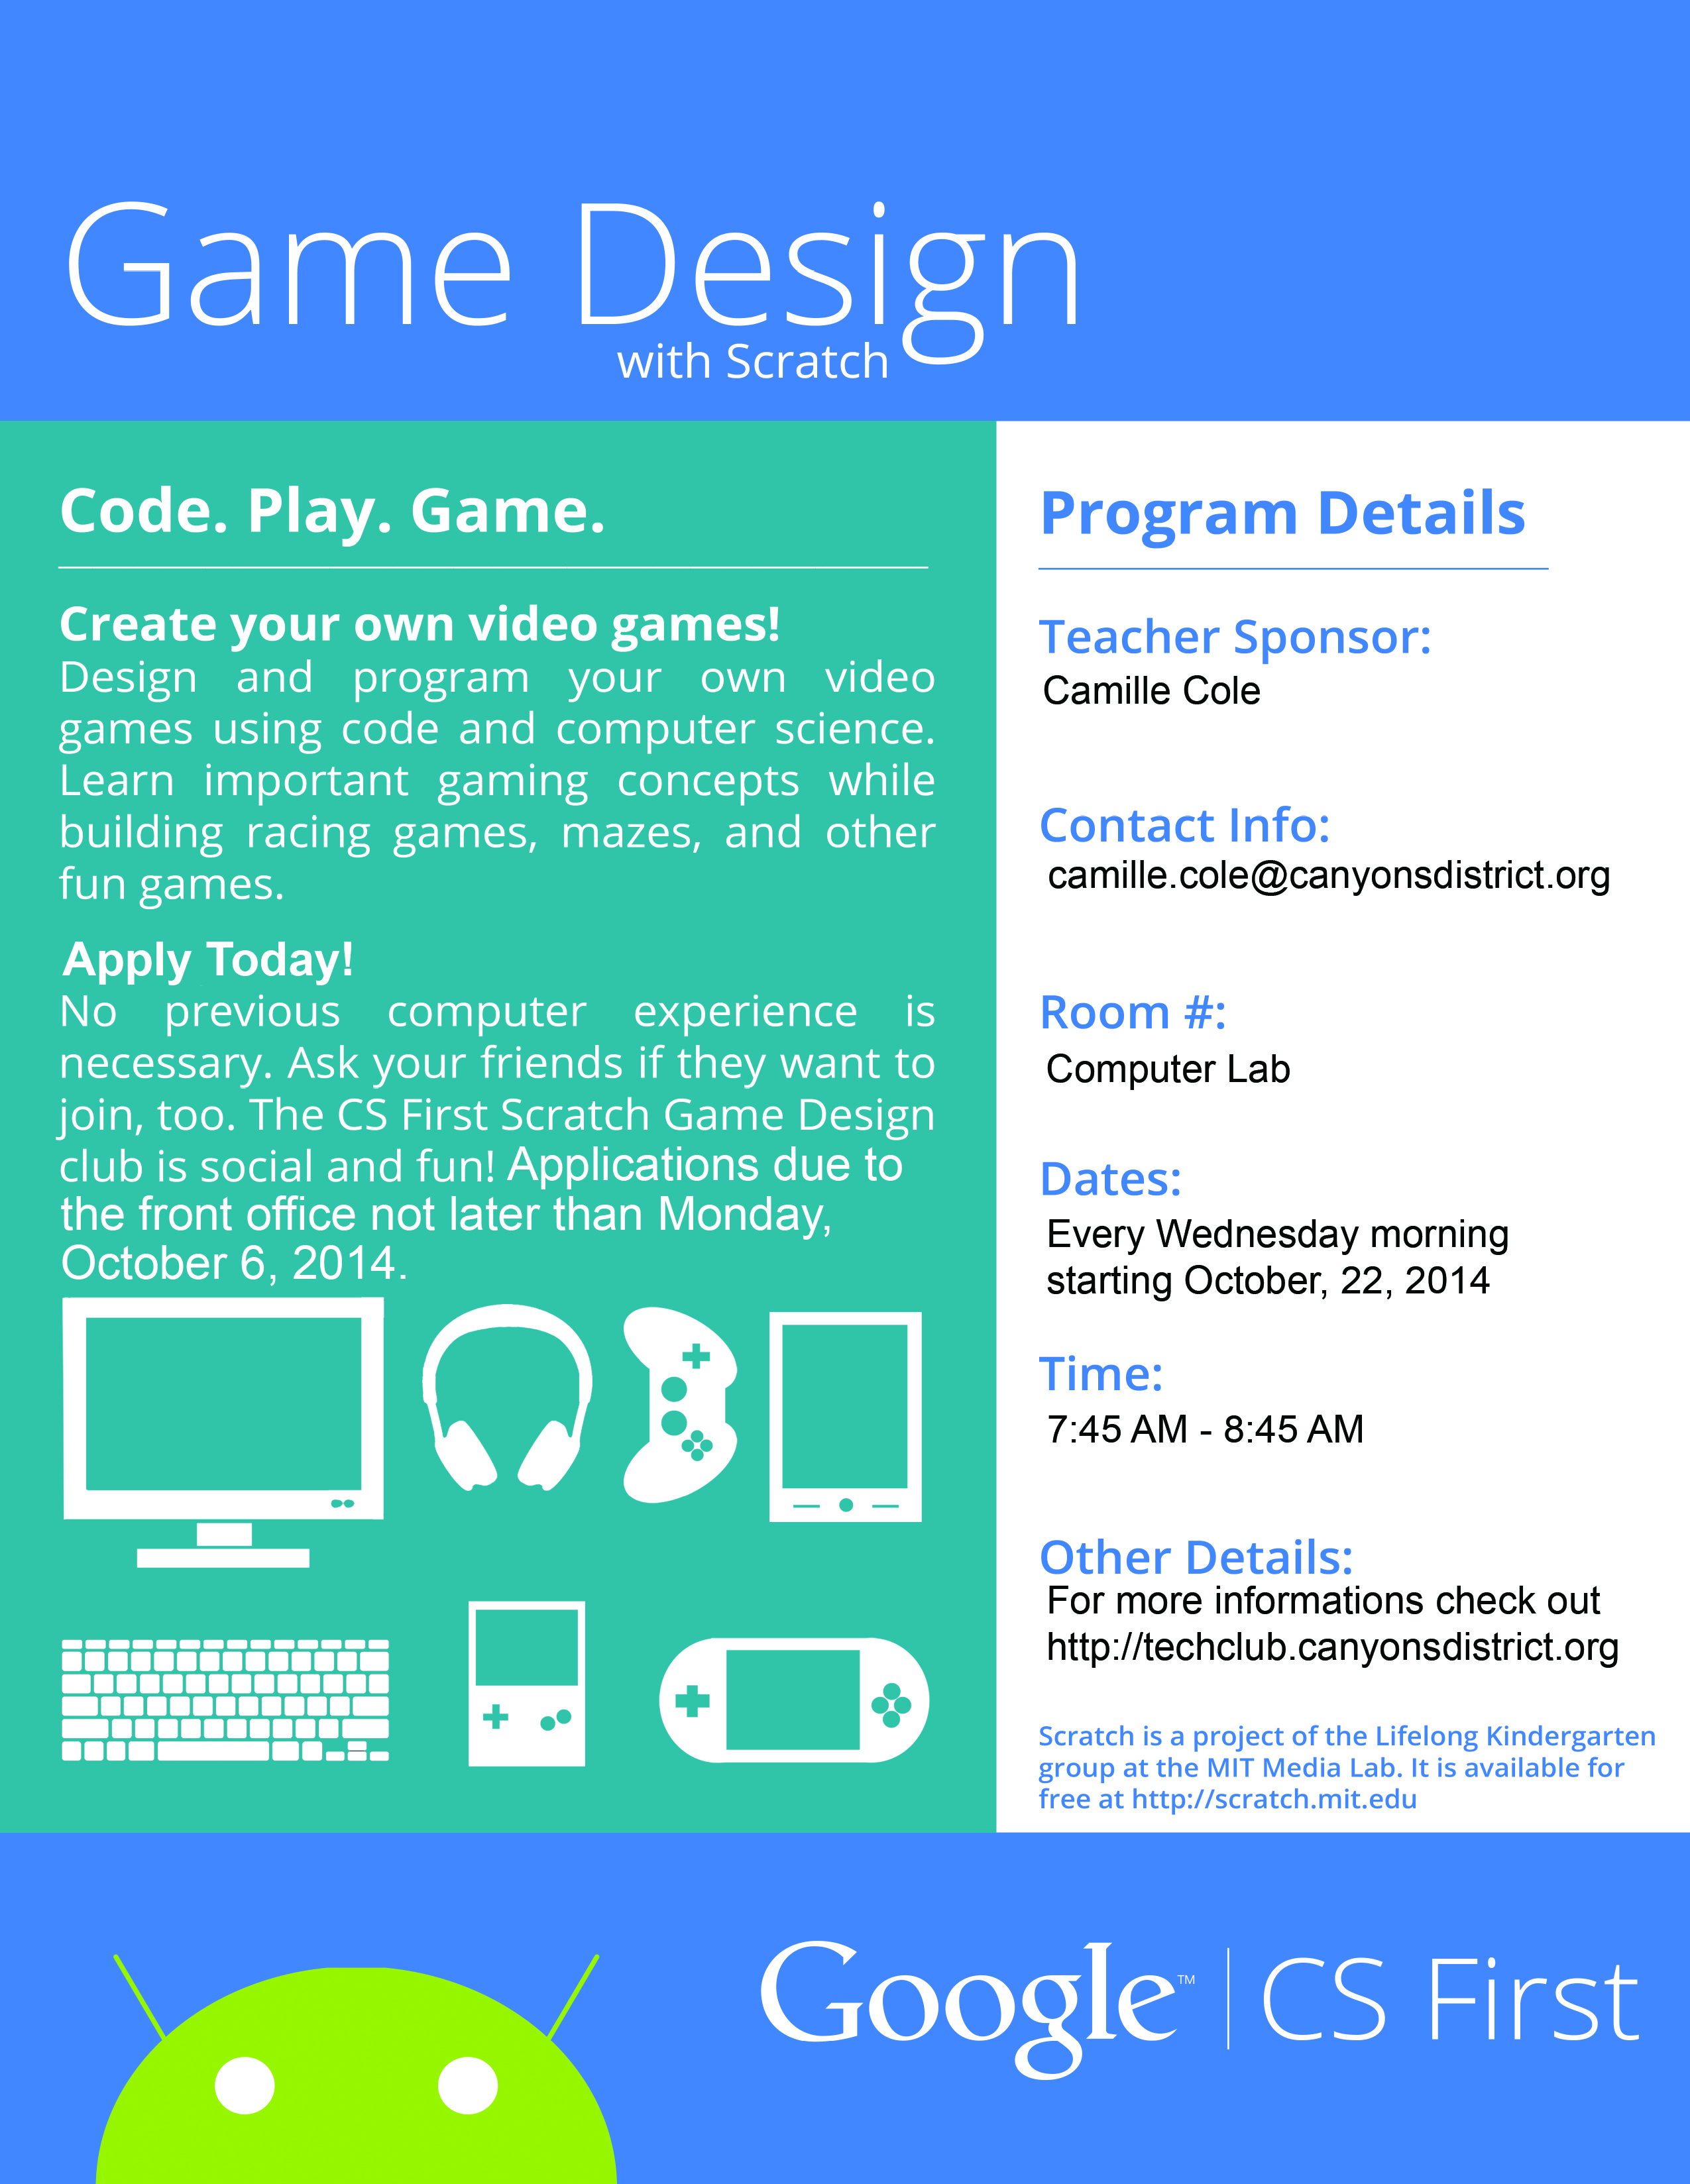 Learn To Code by Making Video Games - No Experience Needed!